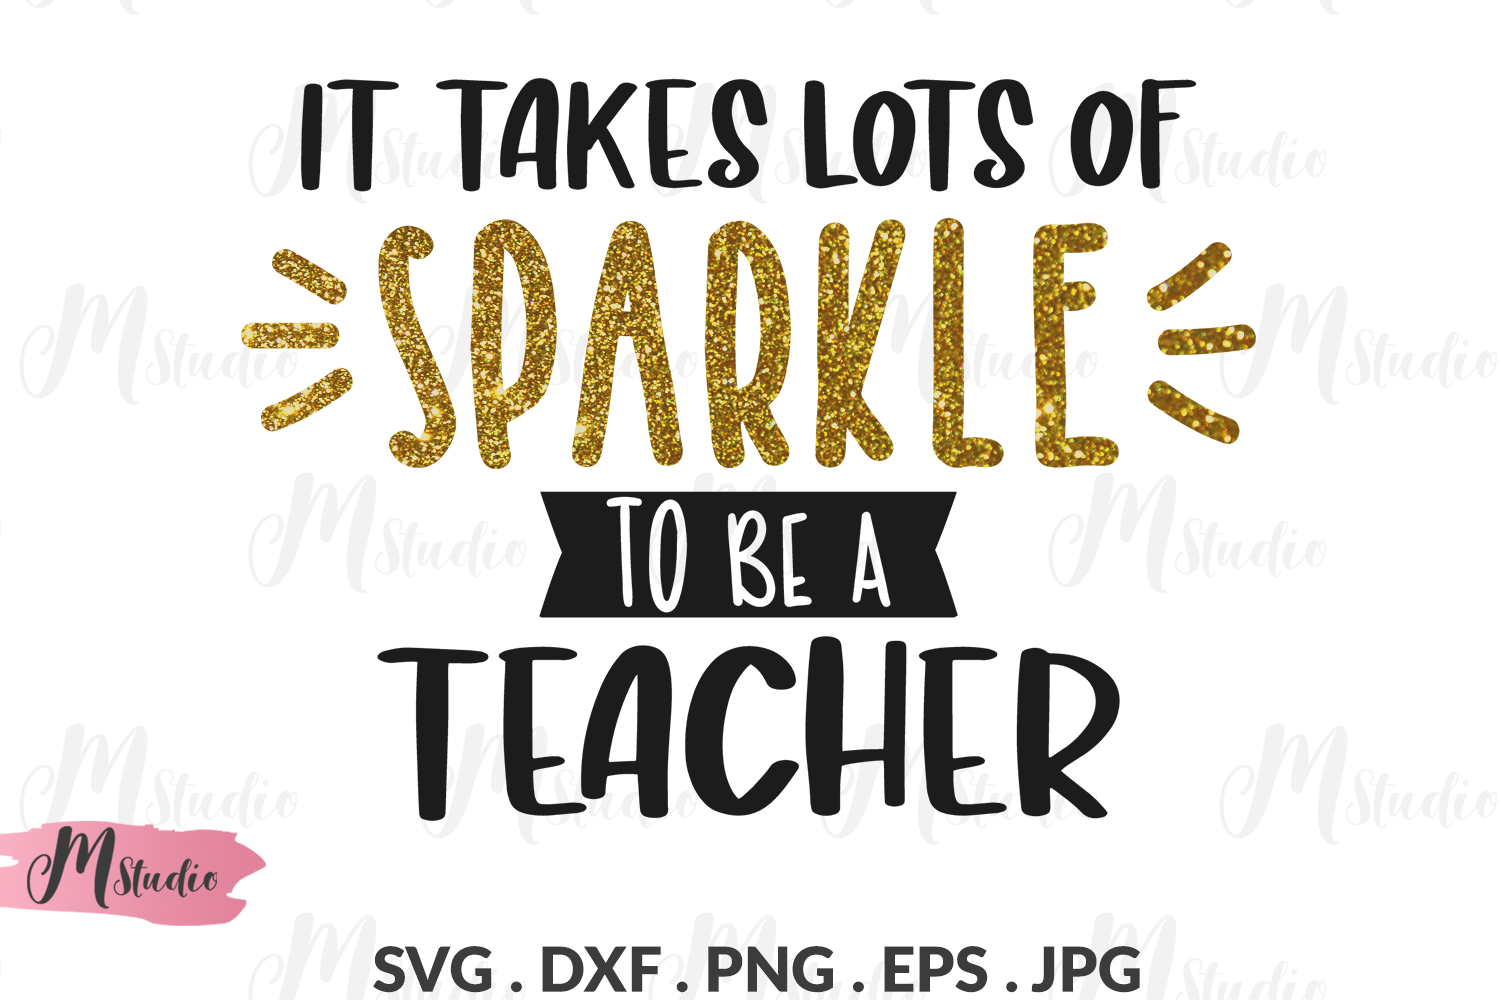 It Takes Lots of Sparkle to be a Teacher svg.